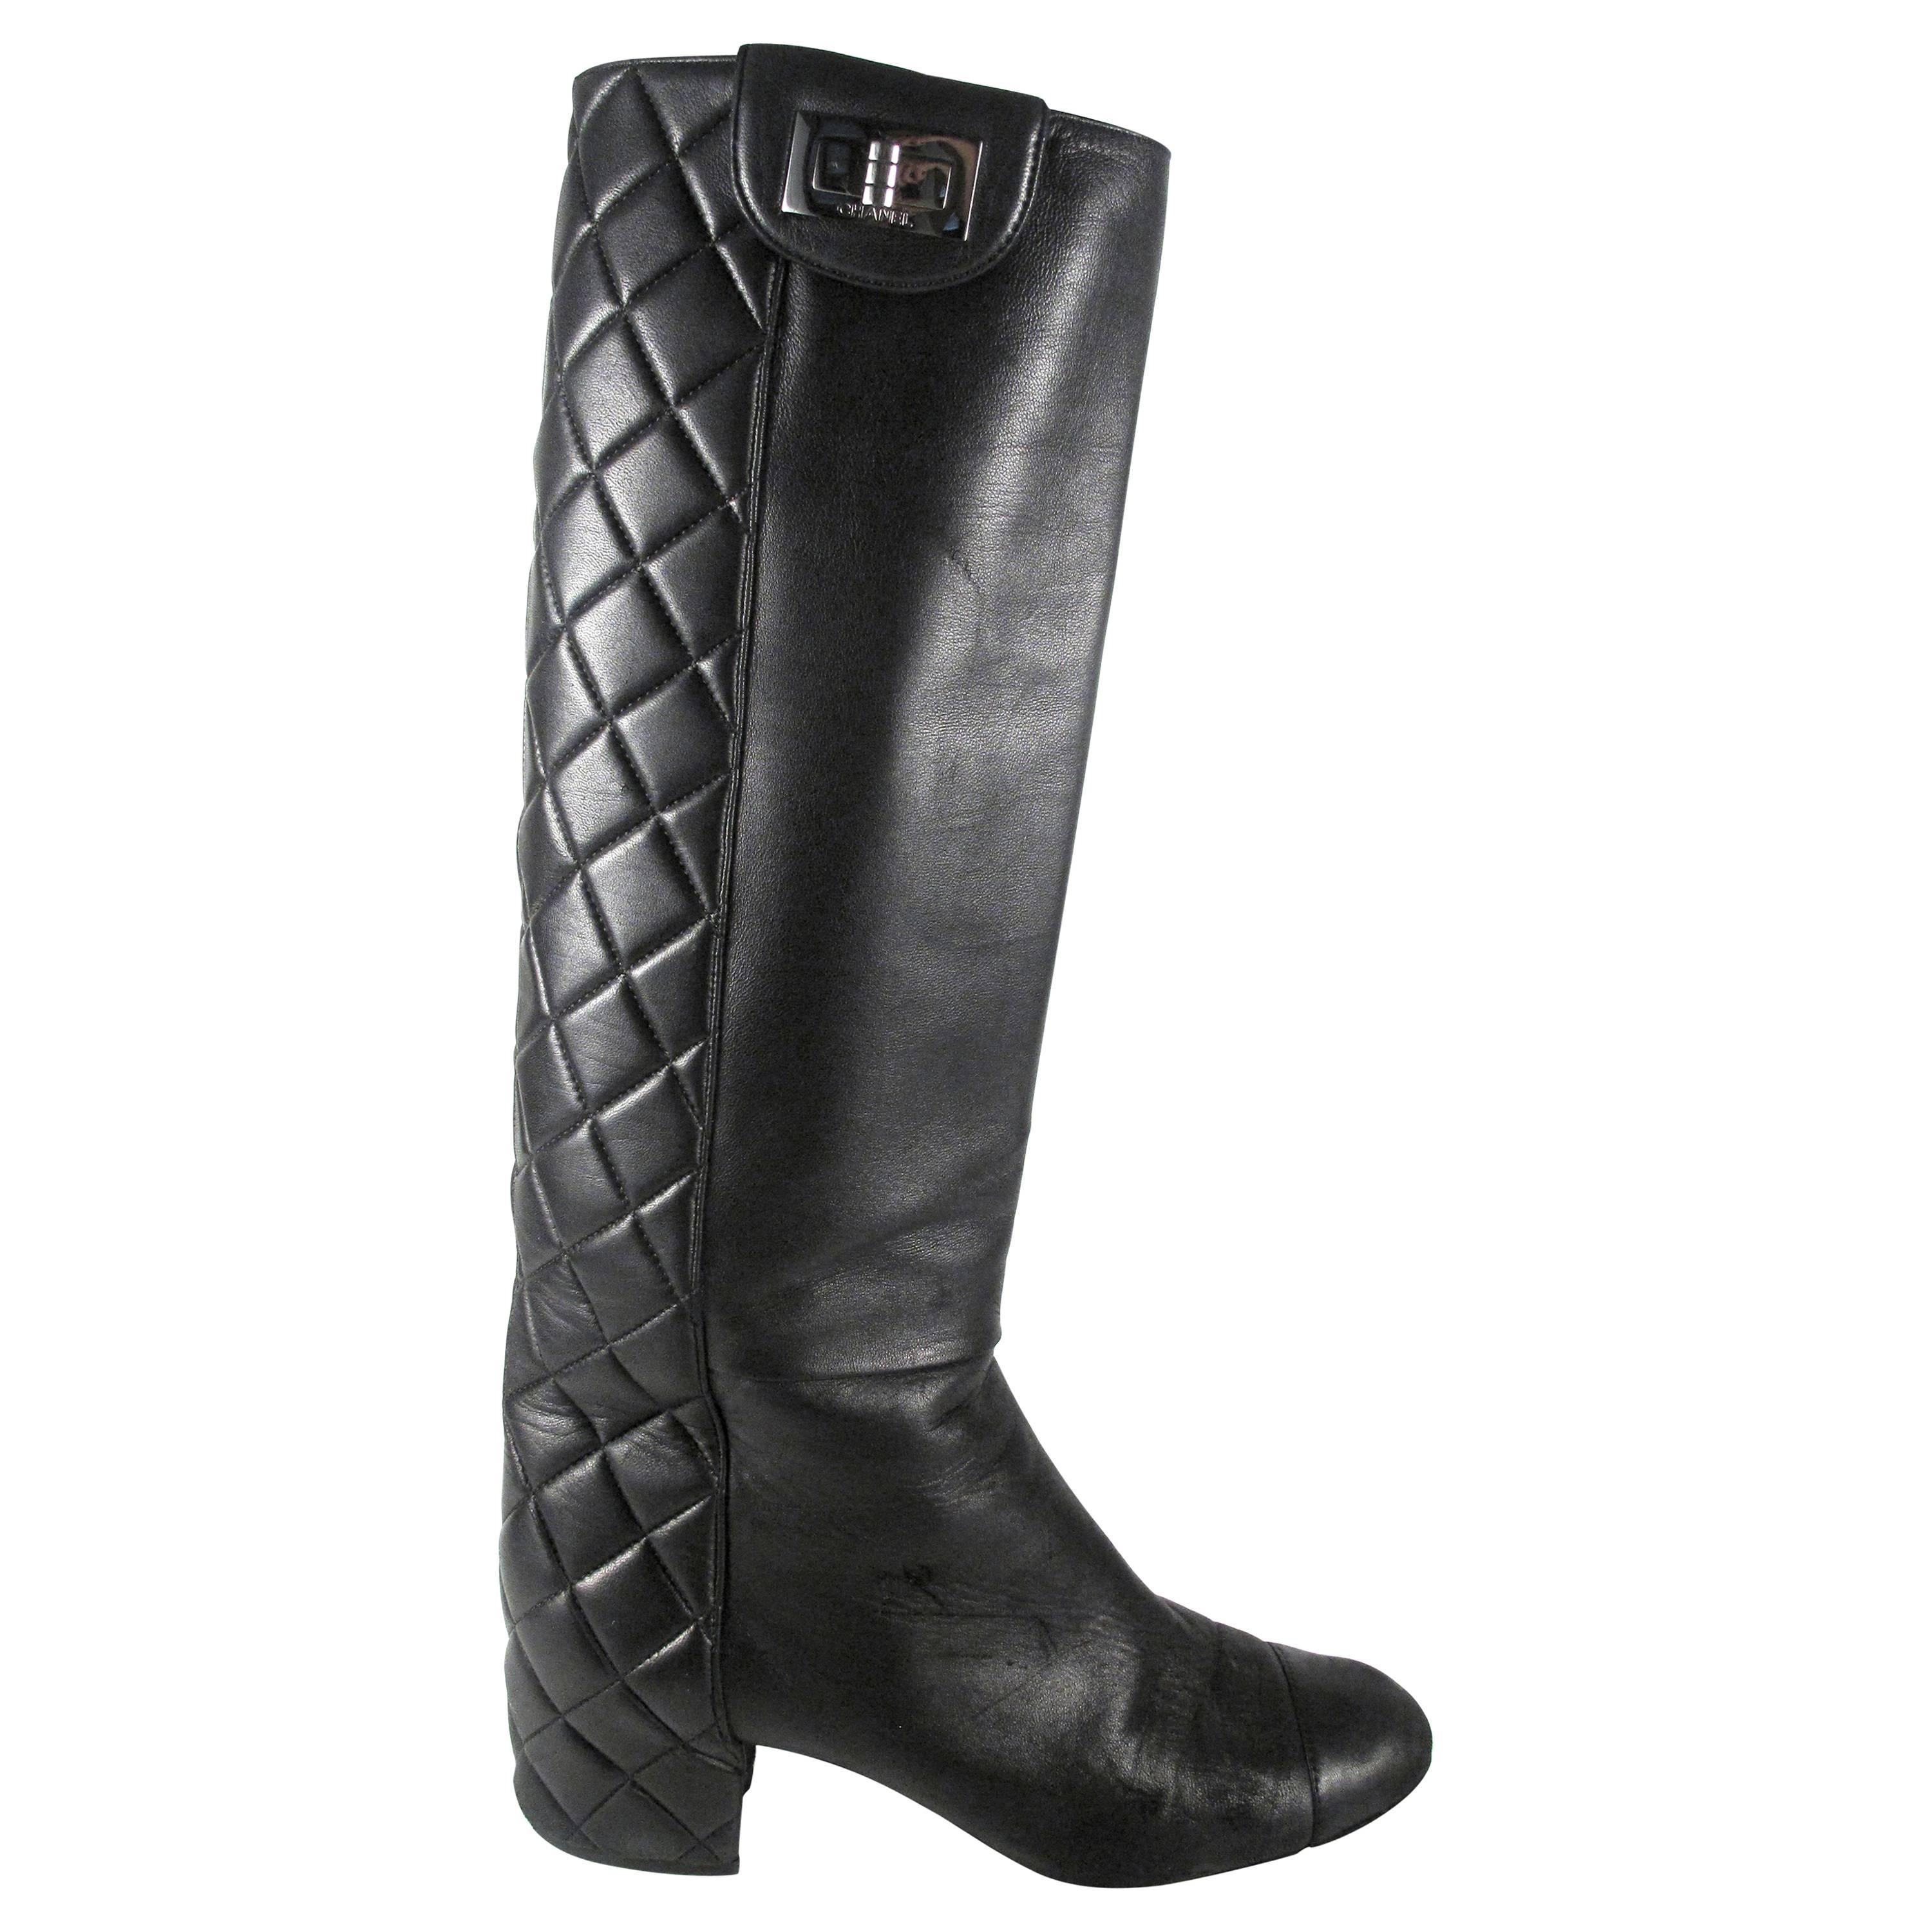 Chanel Boots 6.5 7 36.5 37 Black Quilted Leather Knee High Turn Lock Silver CC